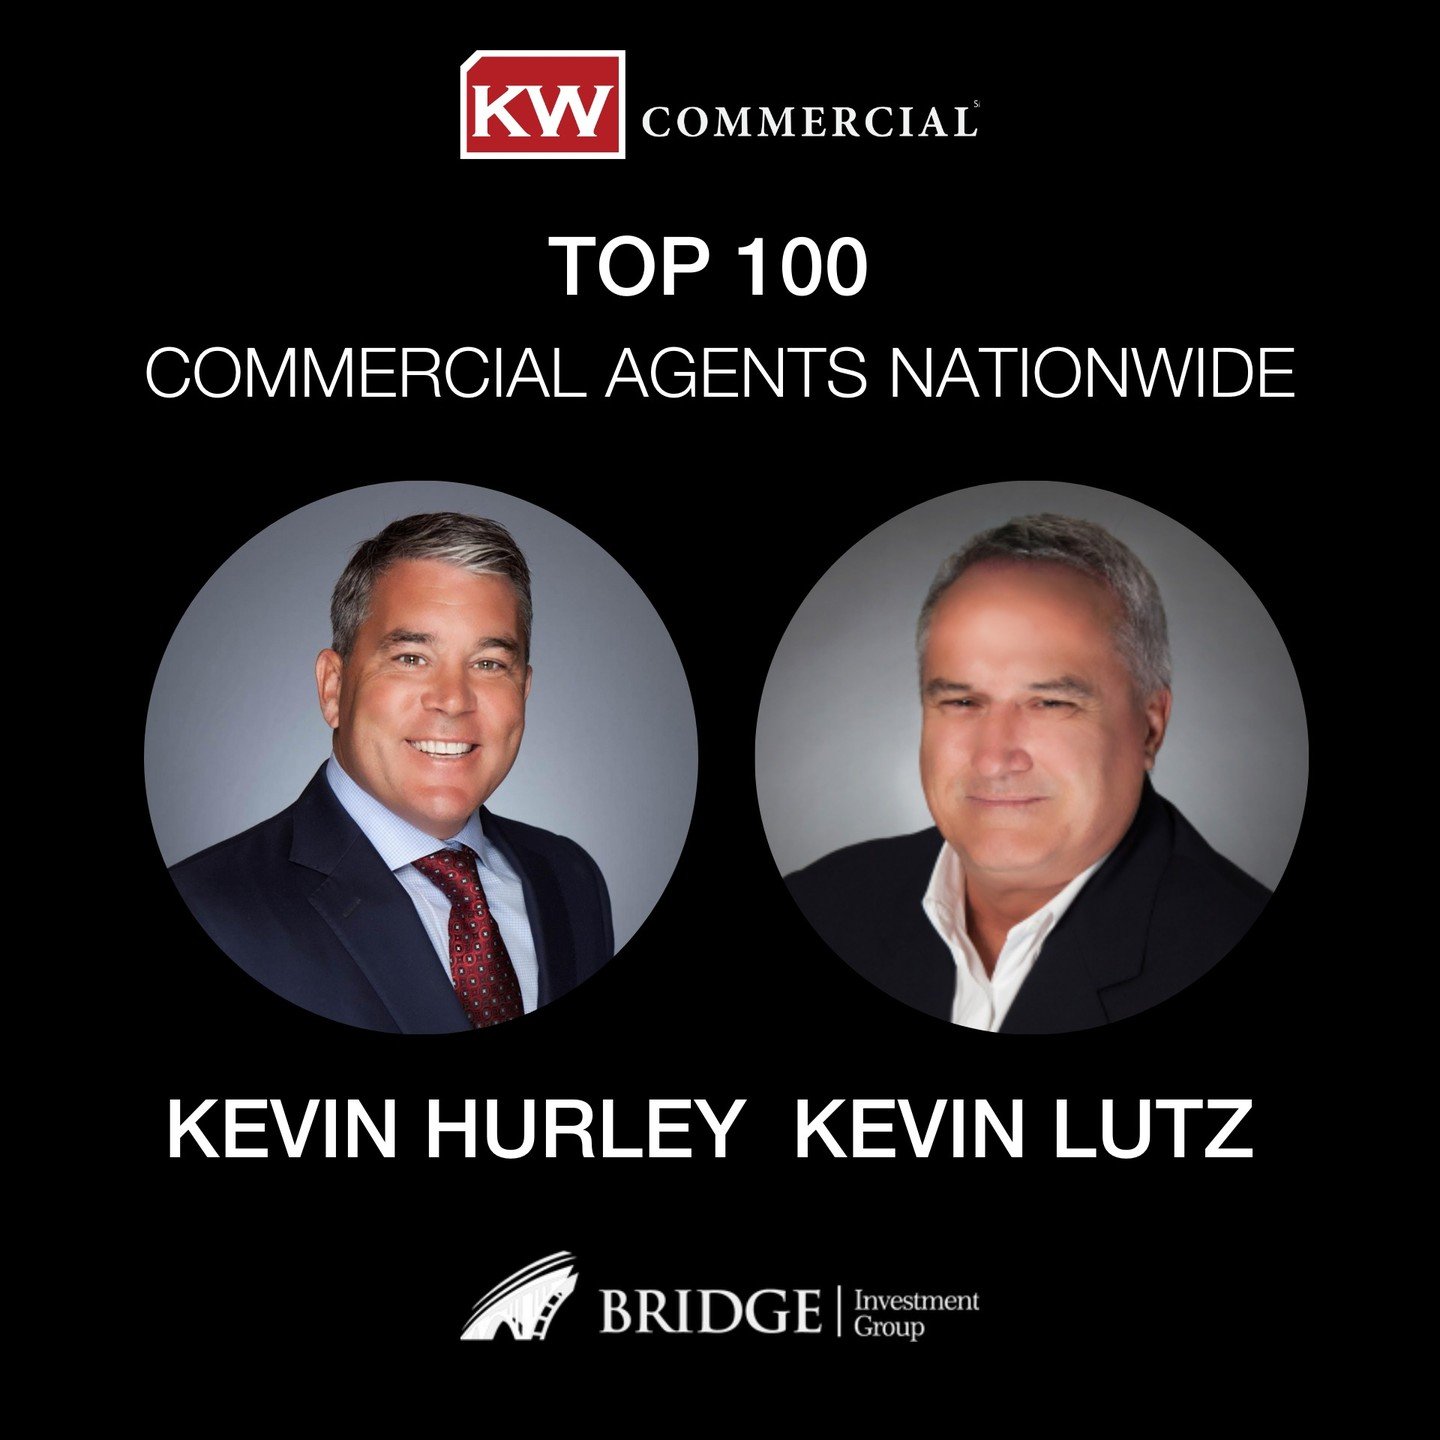 Congratulations to Keller Williams Commercial Pasadena Team, Kevin Hurley &amp; Kevin Lutz of the Bridge Investment Group, for making the TOP 100 list Nationwide of Commercial Real Estate Agents. We are grateful for being in business with you. 

Kell